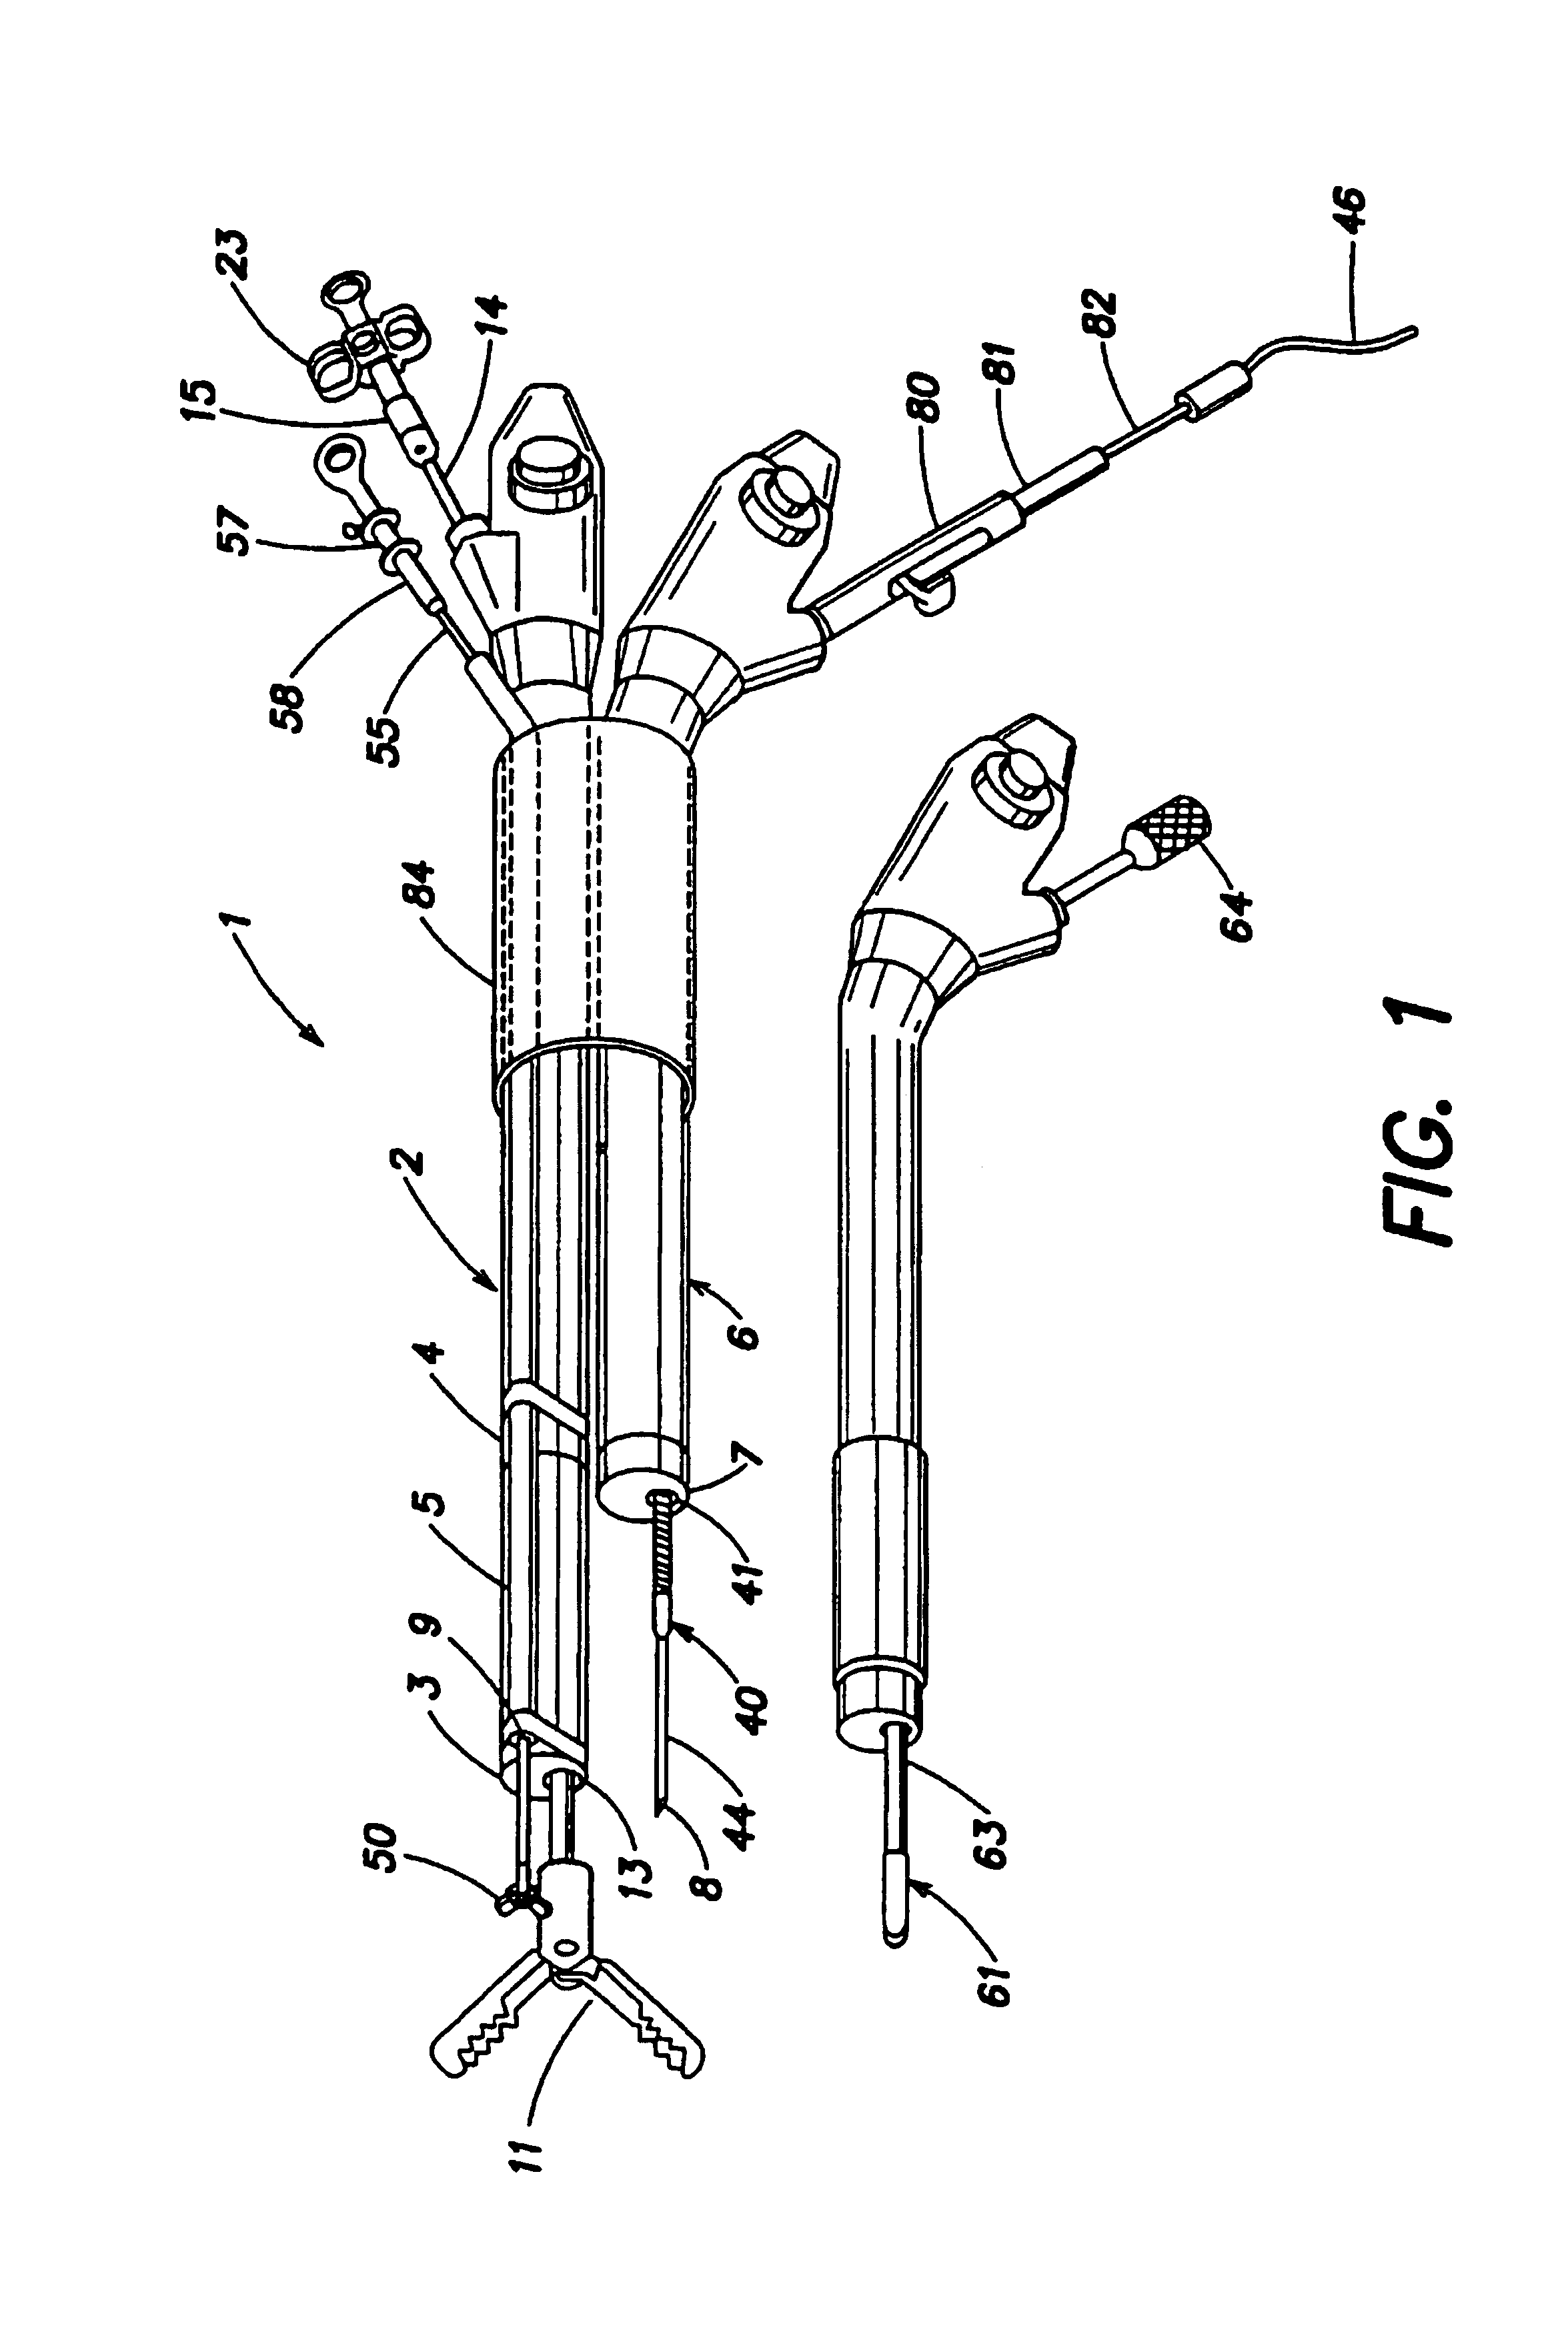 Endoscopic method for forming an artificial valve